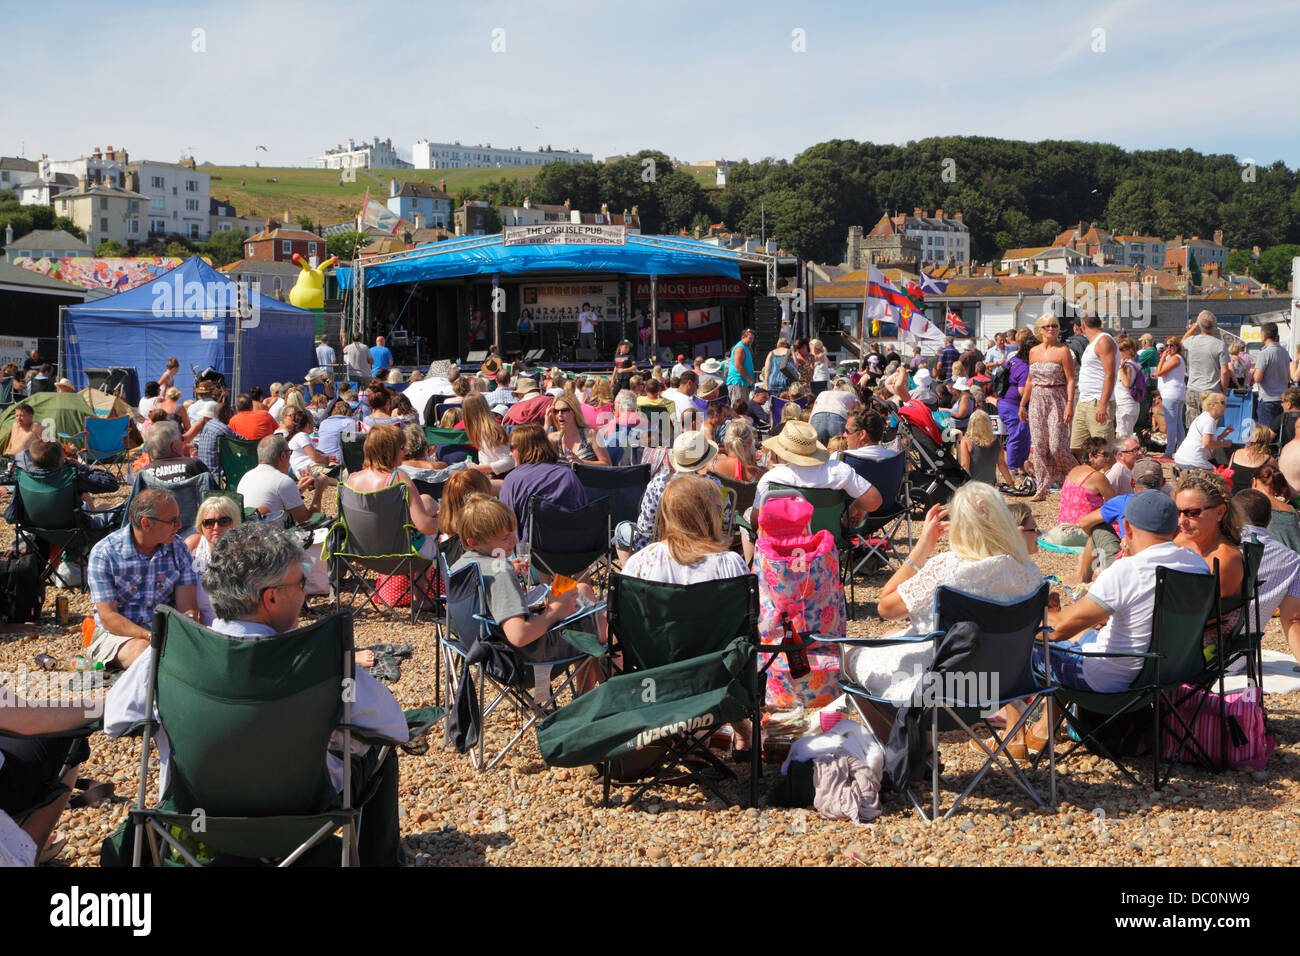 Beach Concert on Hastings Seafront in aid of the RNLI Lifeboat, East Sussex, England Stock Photo